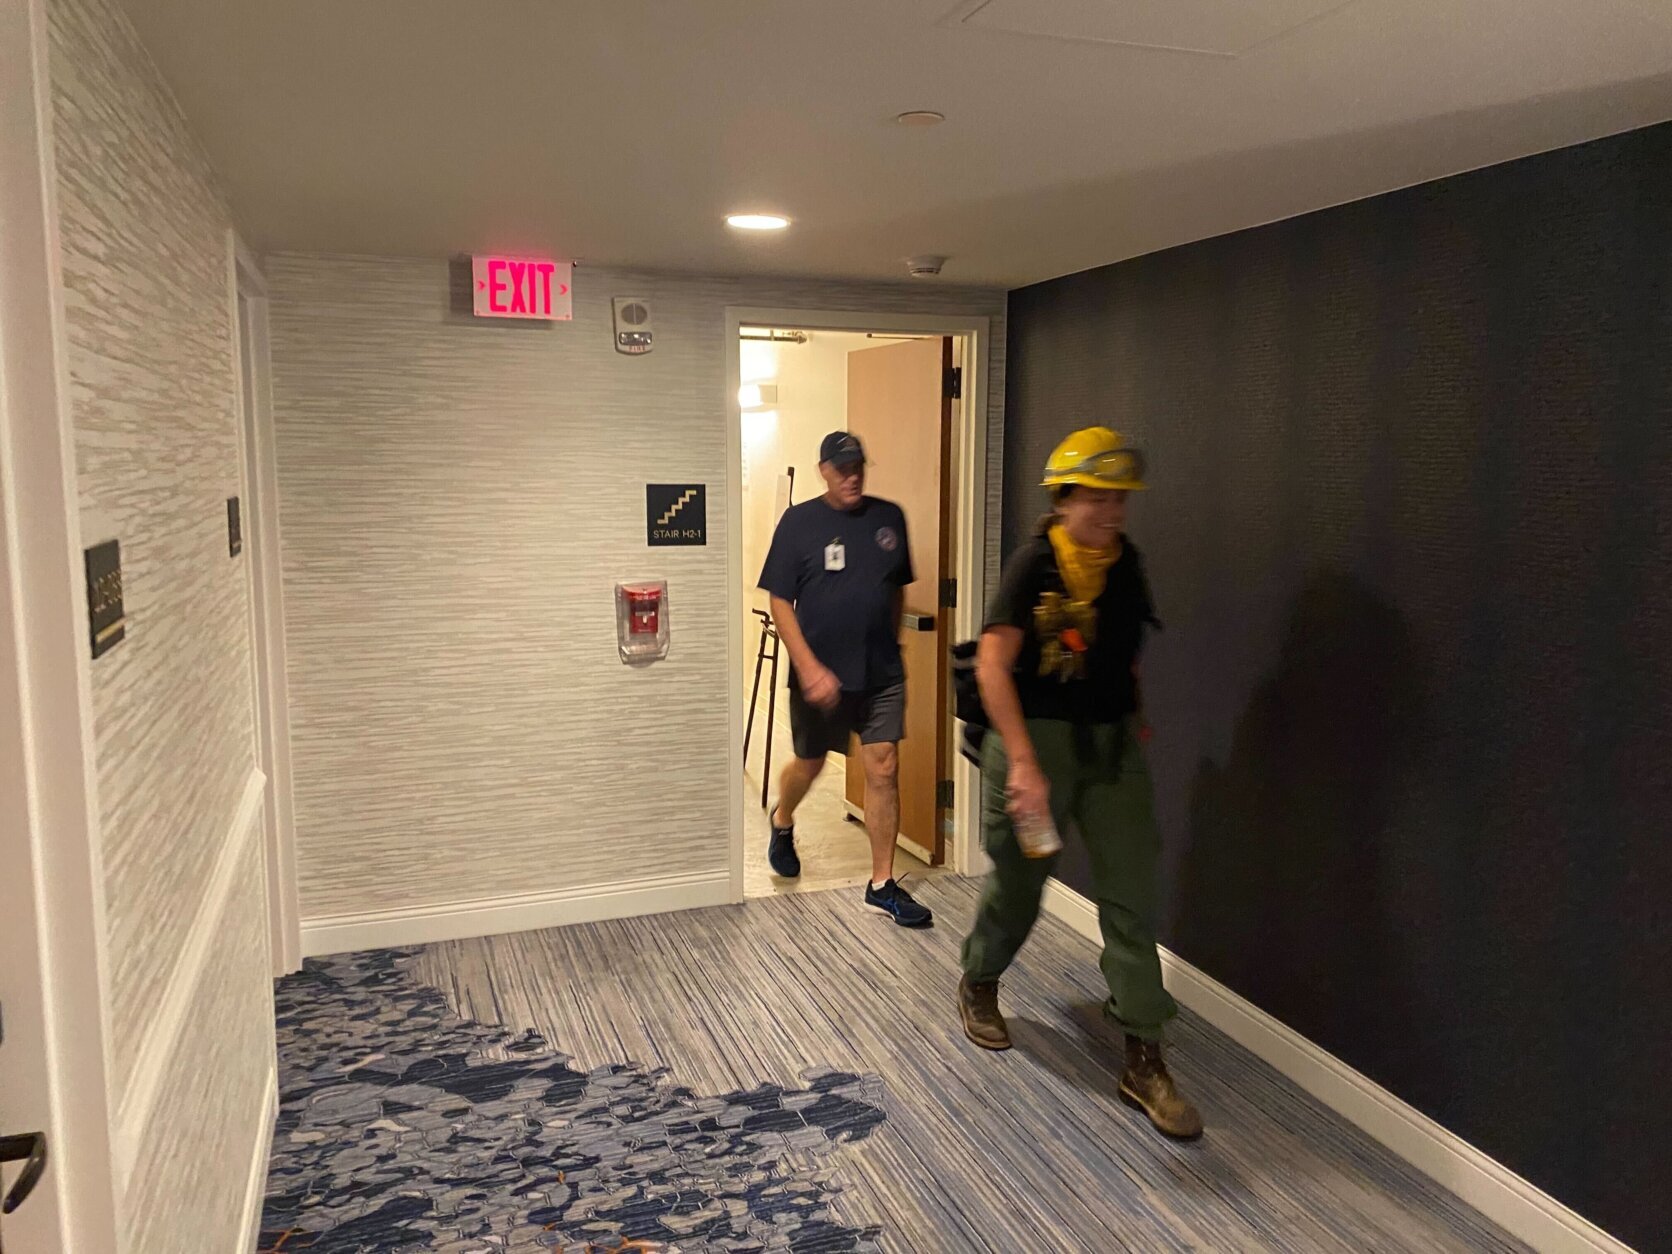 On Sunday morning, firefighters from all across the D.C. area climbed 110 stories worth of stairs at the Gaylord National Resort in Prince George’s County, Maryland, to replicate the climb to the top of the Twin Towers. 